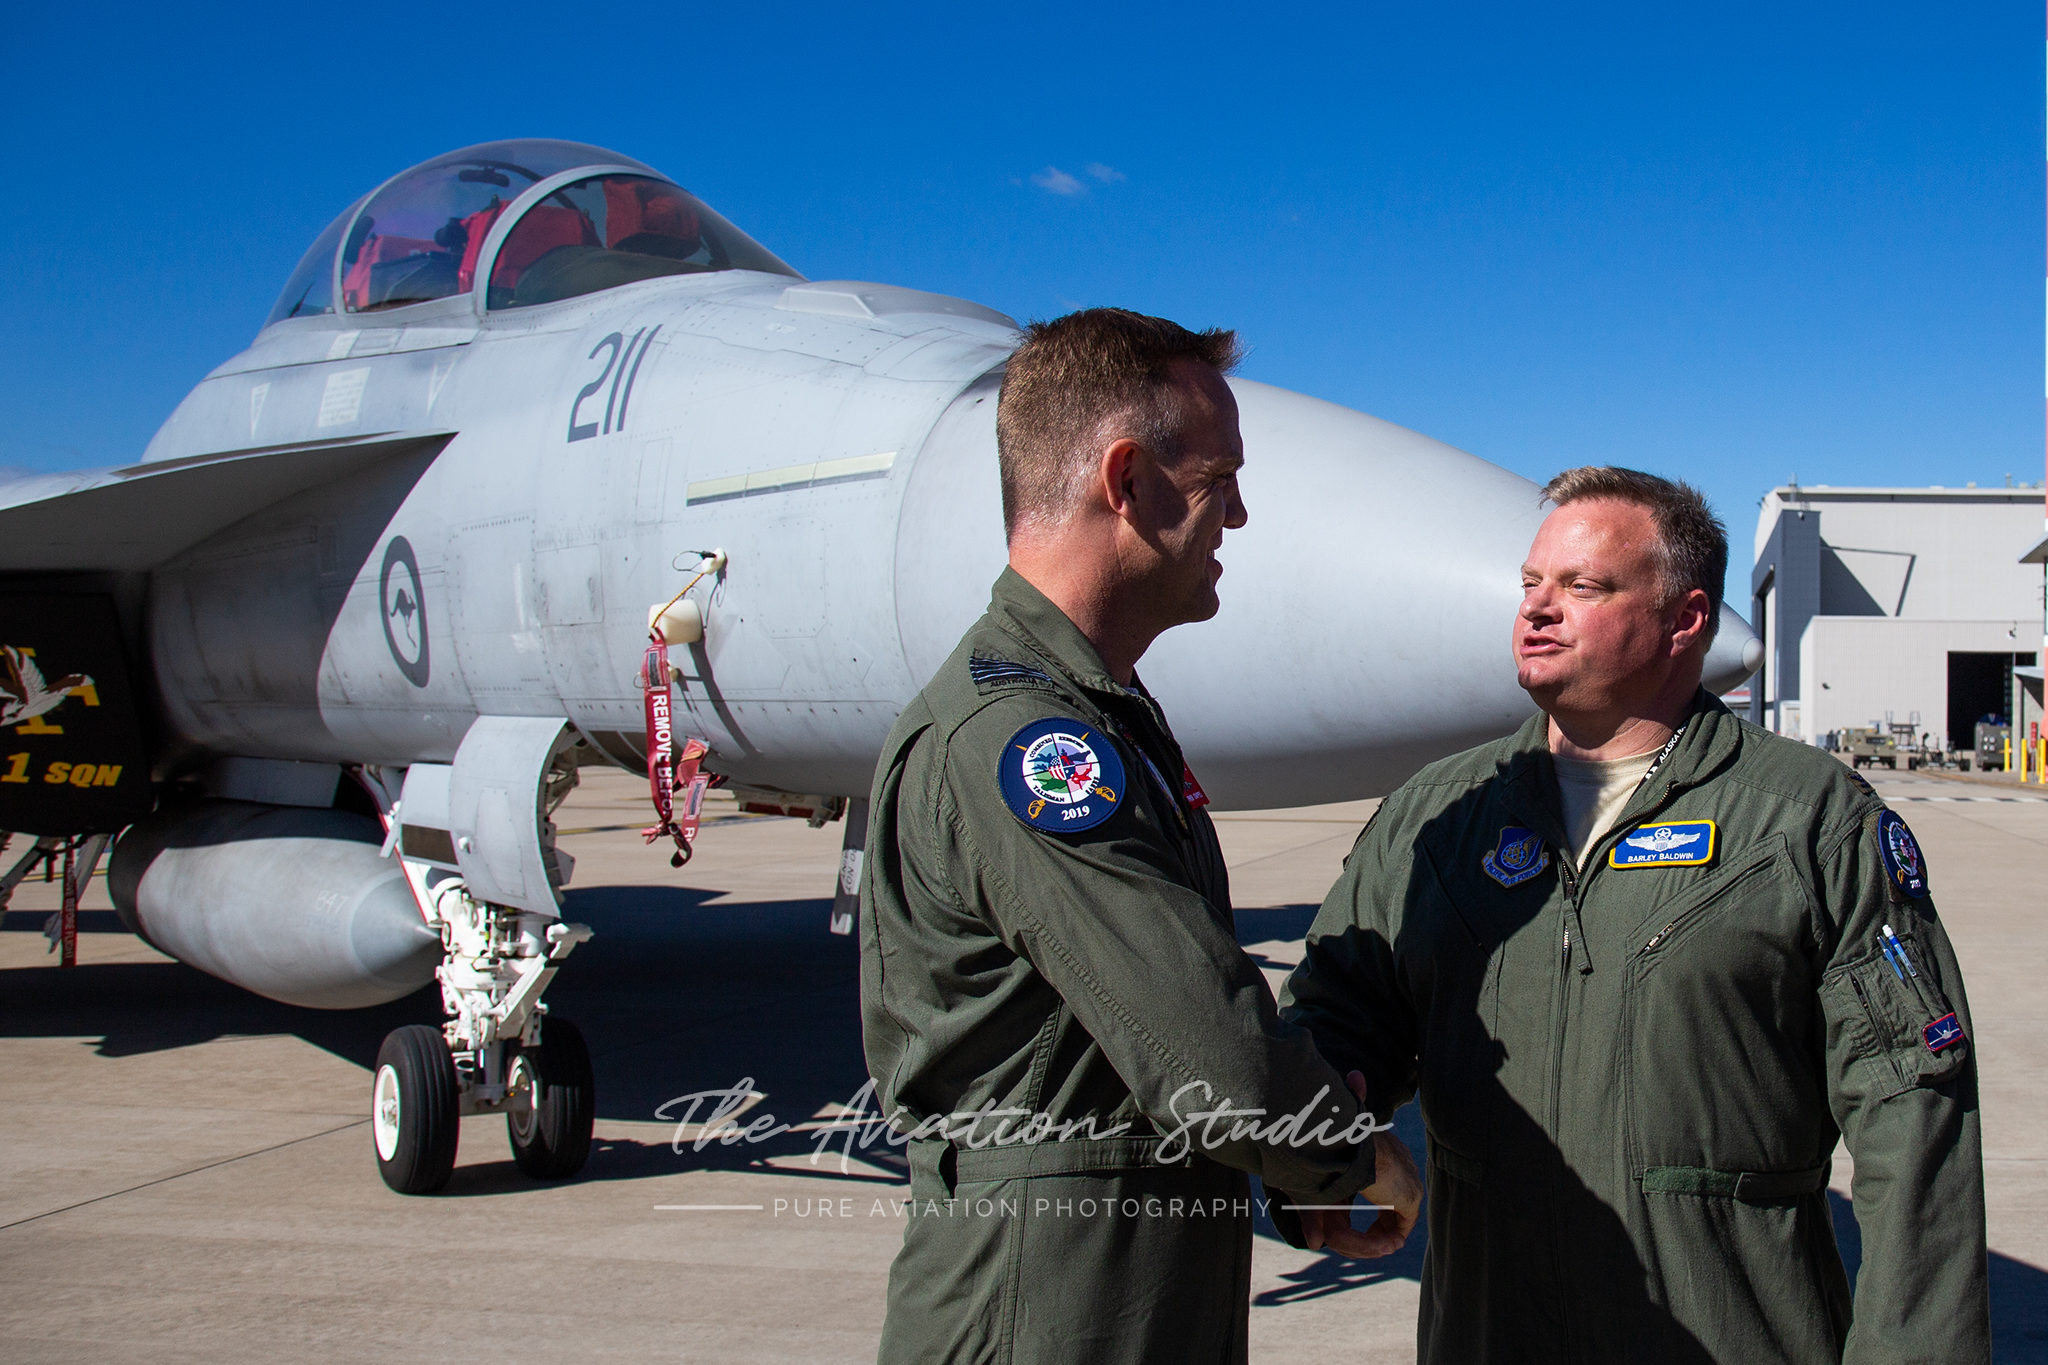  Group Captain Stephen Chappell 82nd Wing (L)  Colonel Barley Baldwin, Amberley USAF Group Commander, 13th Expeditionary Air Force (R) (Image: Lance Broad)